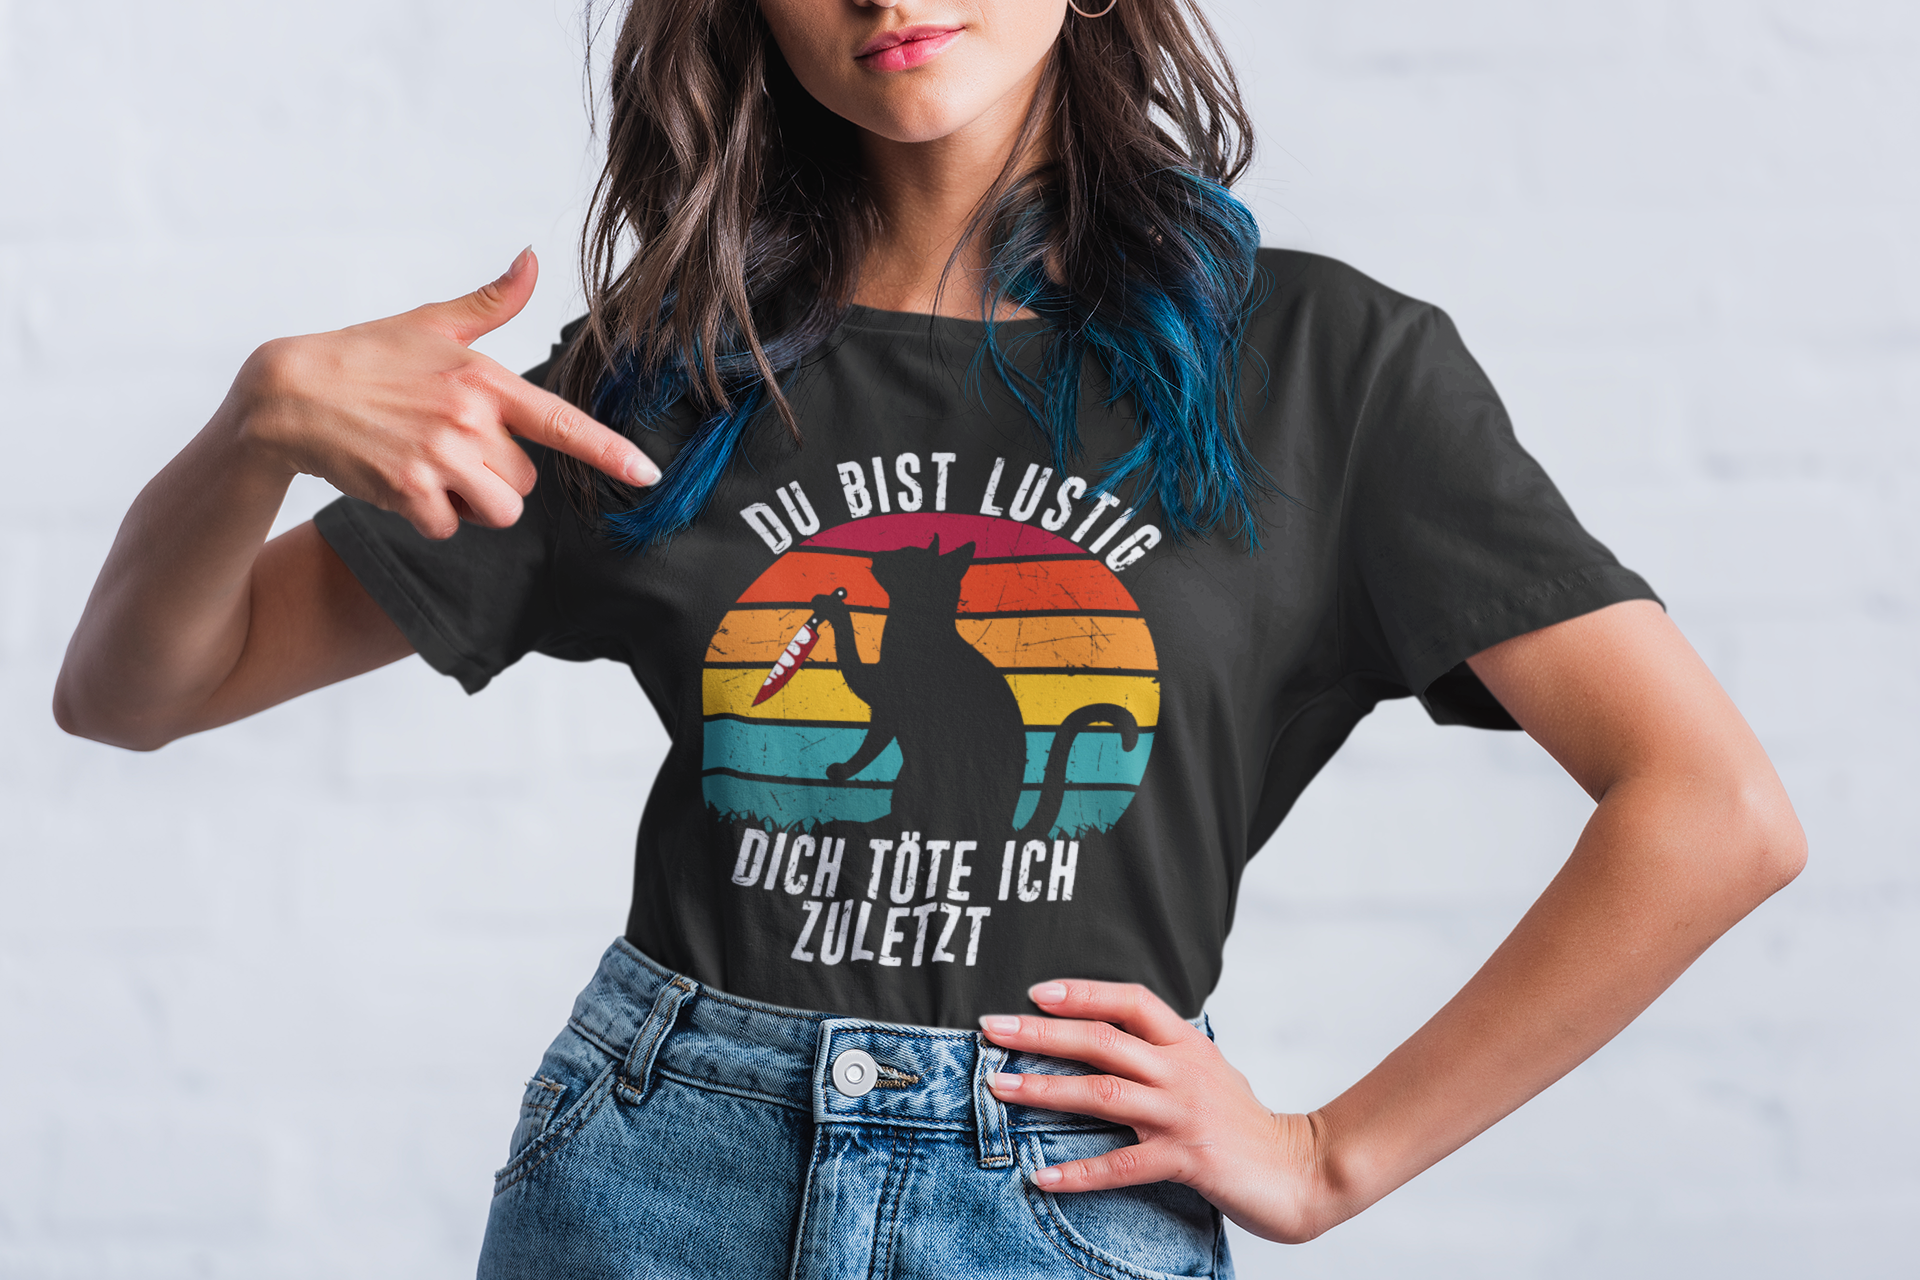 mockup-of-a-woman-with-dyed-hair-pointing-at-her-t-shirt-45702-r-el2